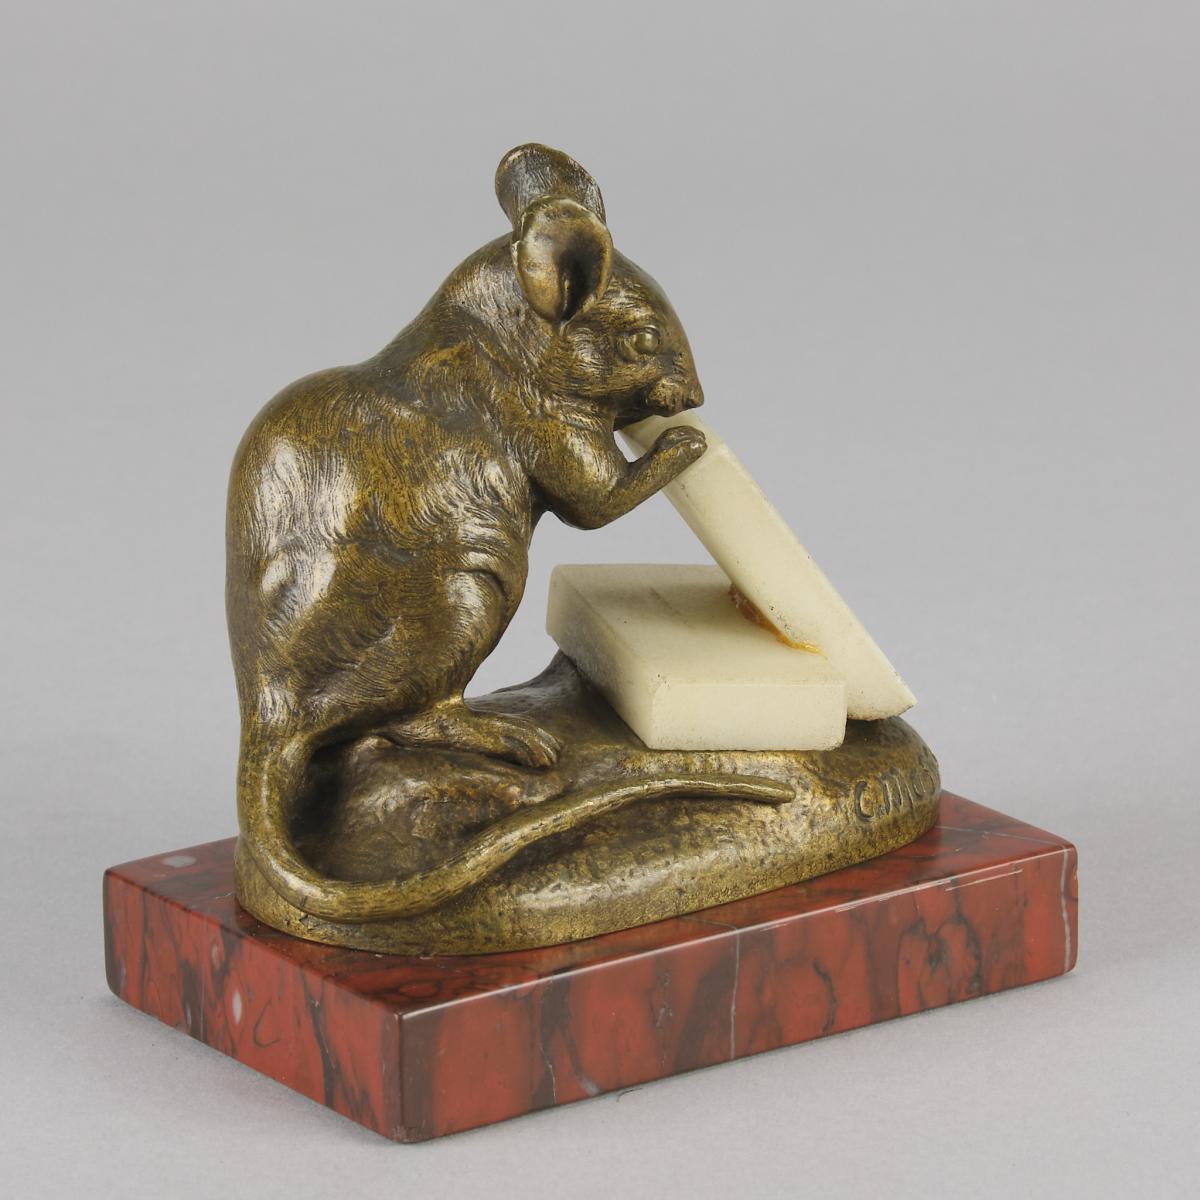 Early 20th Century French Animalier Bronze entitled "Mouse And Cheese" by Clovis Masson